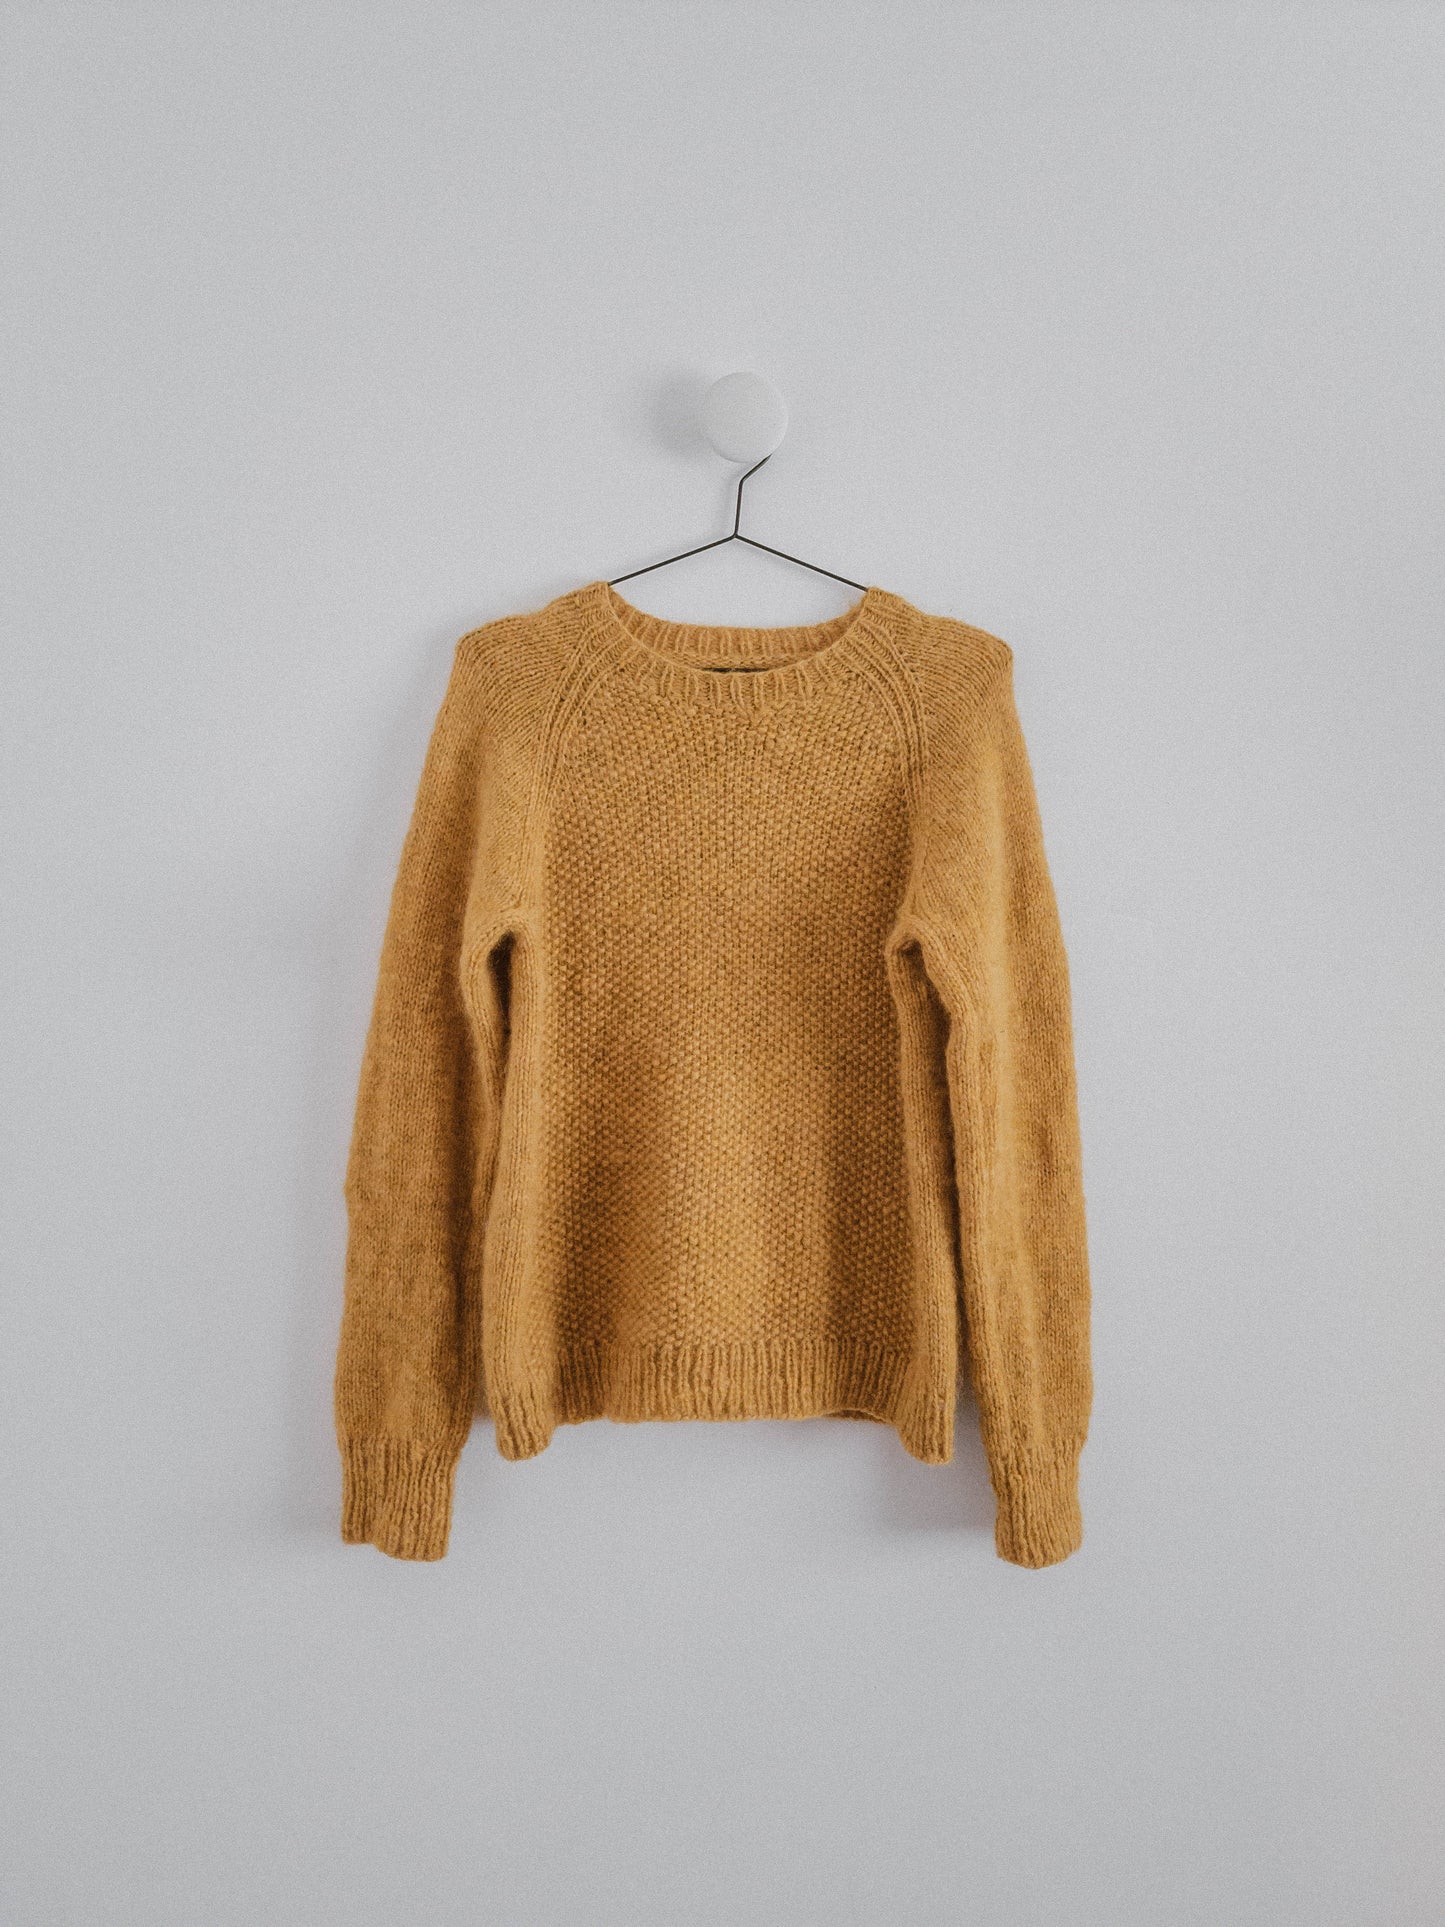 Amber-yellow hand-knit raglan 'Before Fall Sweater' by Ulven on a black hanger, white background. Made with unspun Nutiden yarn by Höner och Eir, featuring a seed stitch front panel.